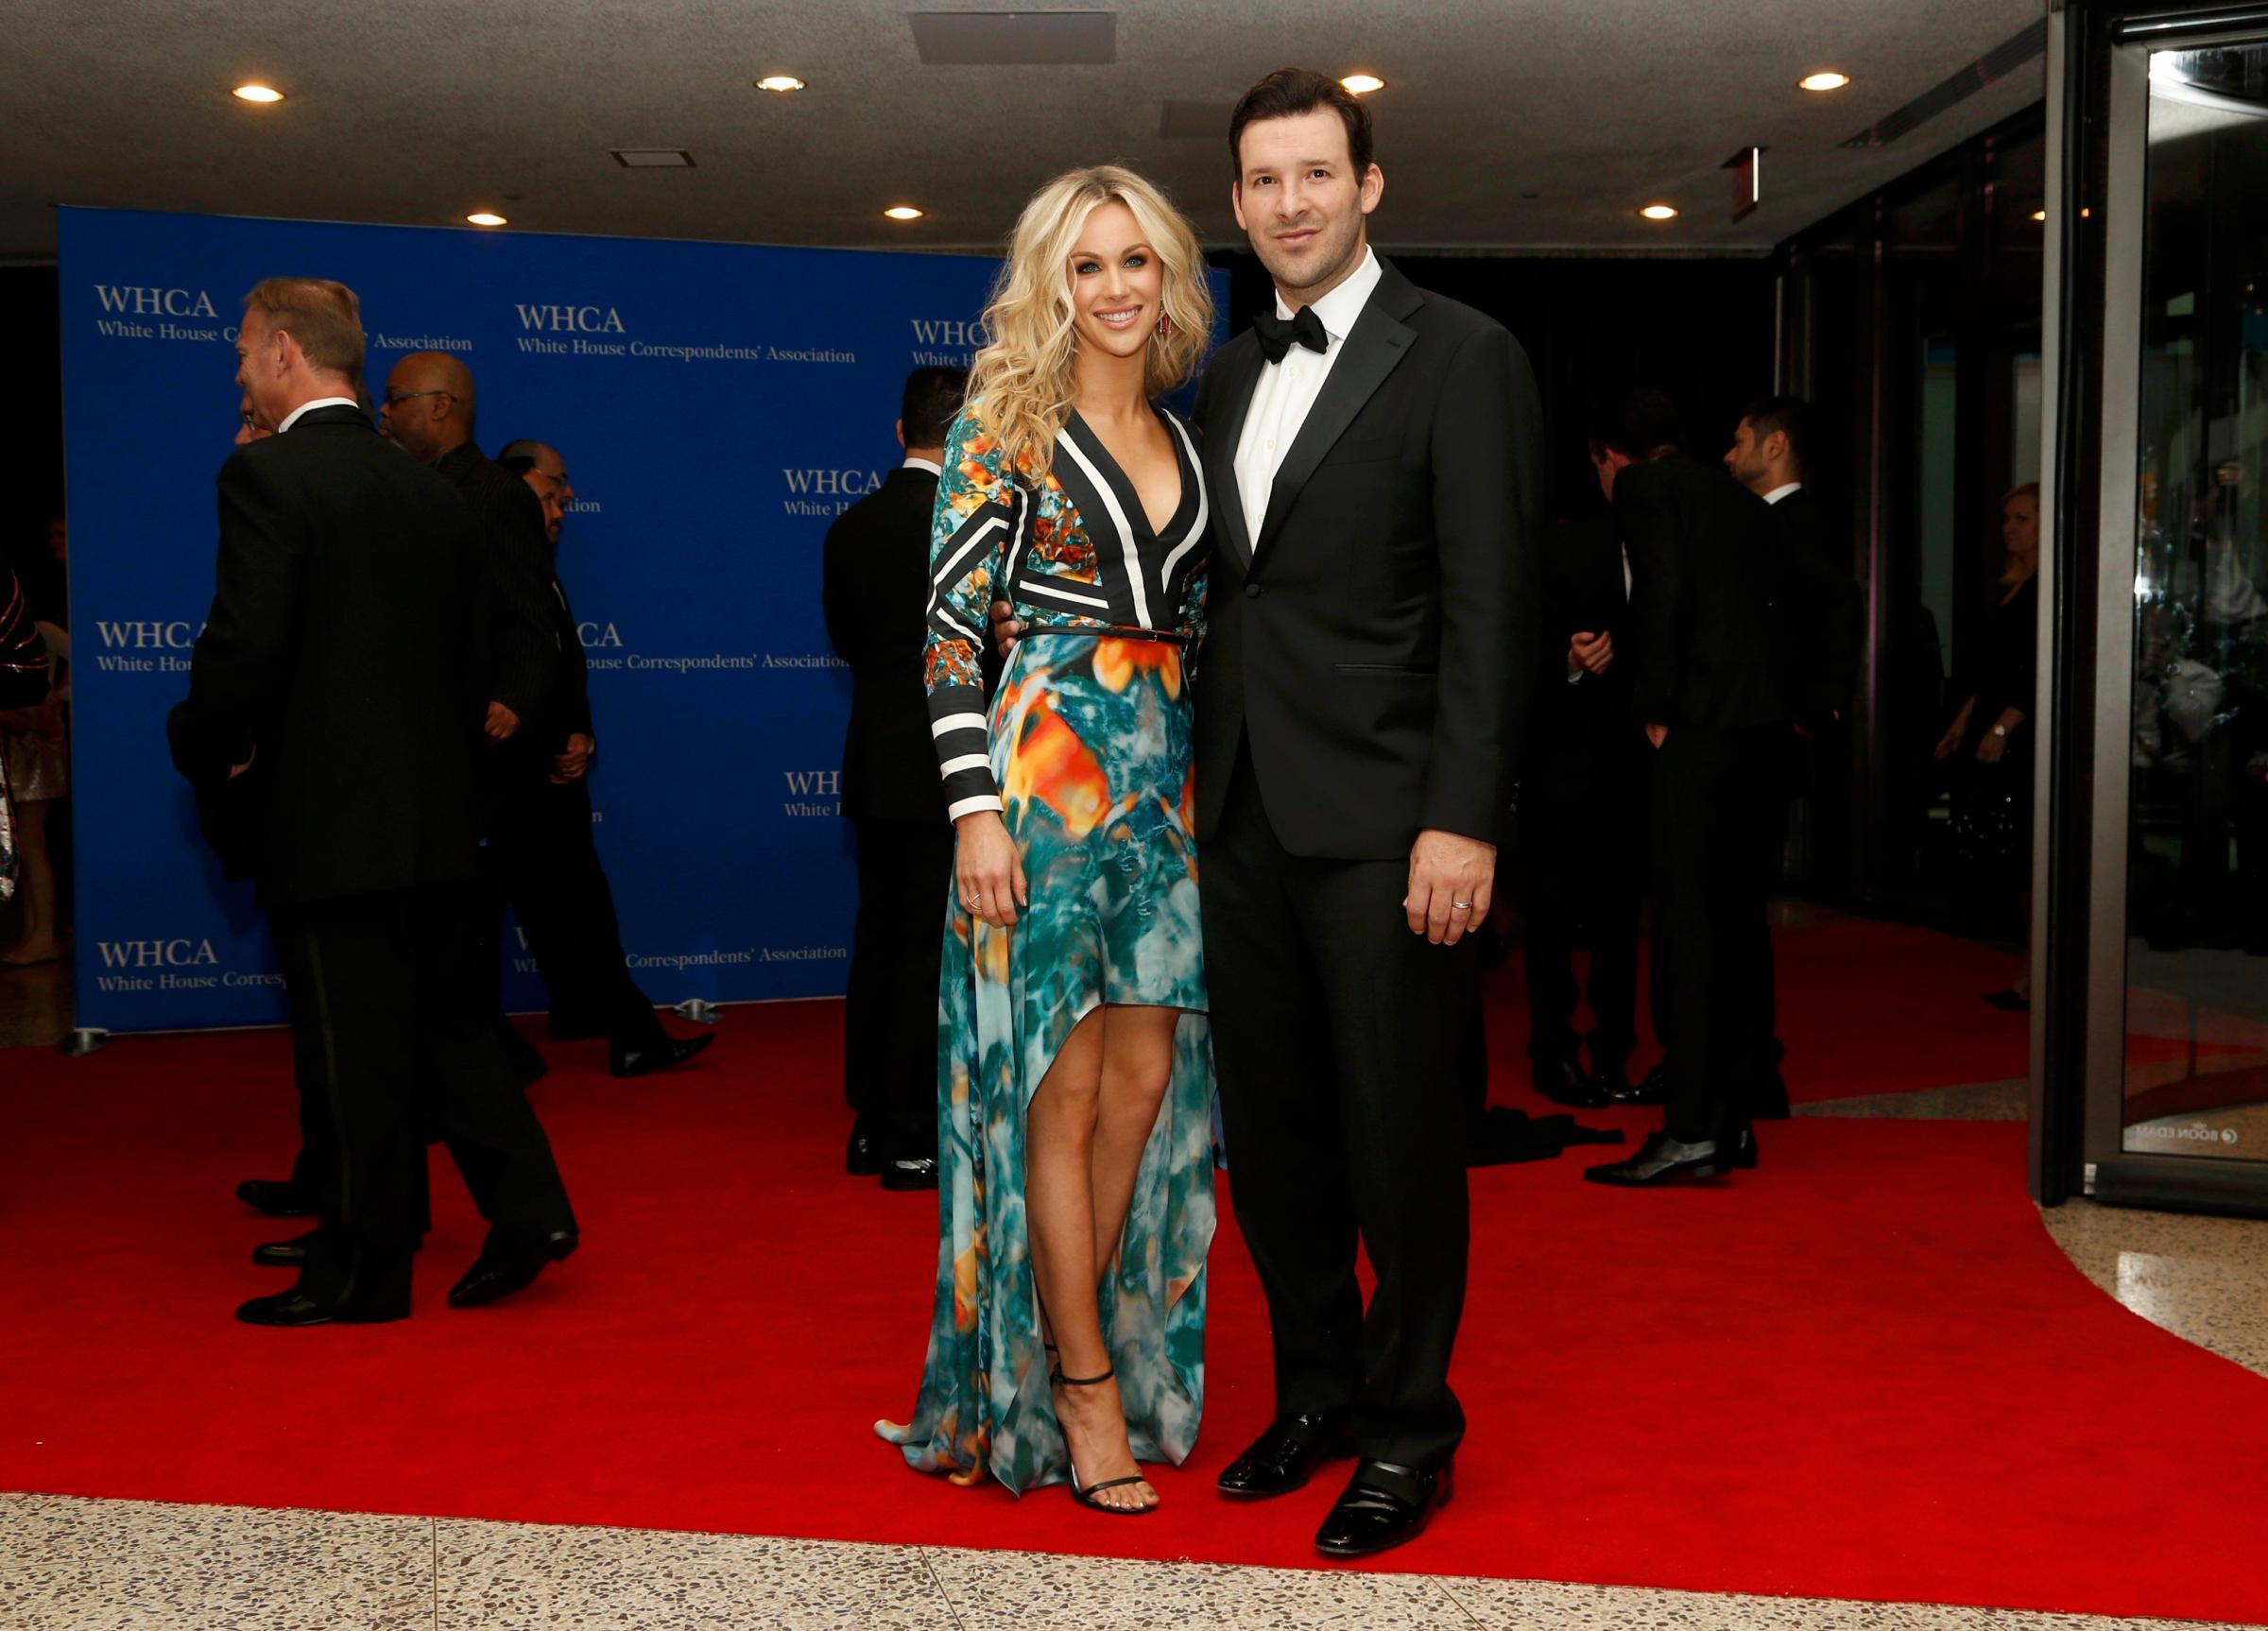 Dallas Cowboys quarterback Tony and wife Candice arrive for the annual White House Correspondents' Association dinner in Washington